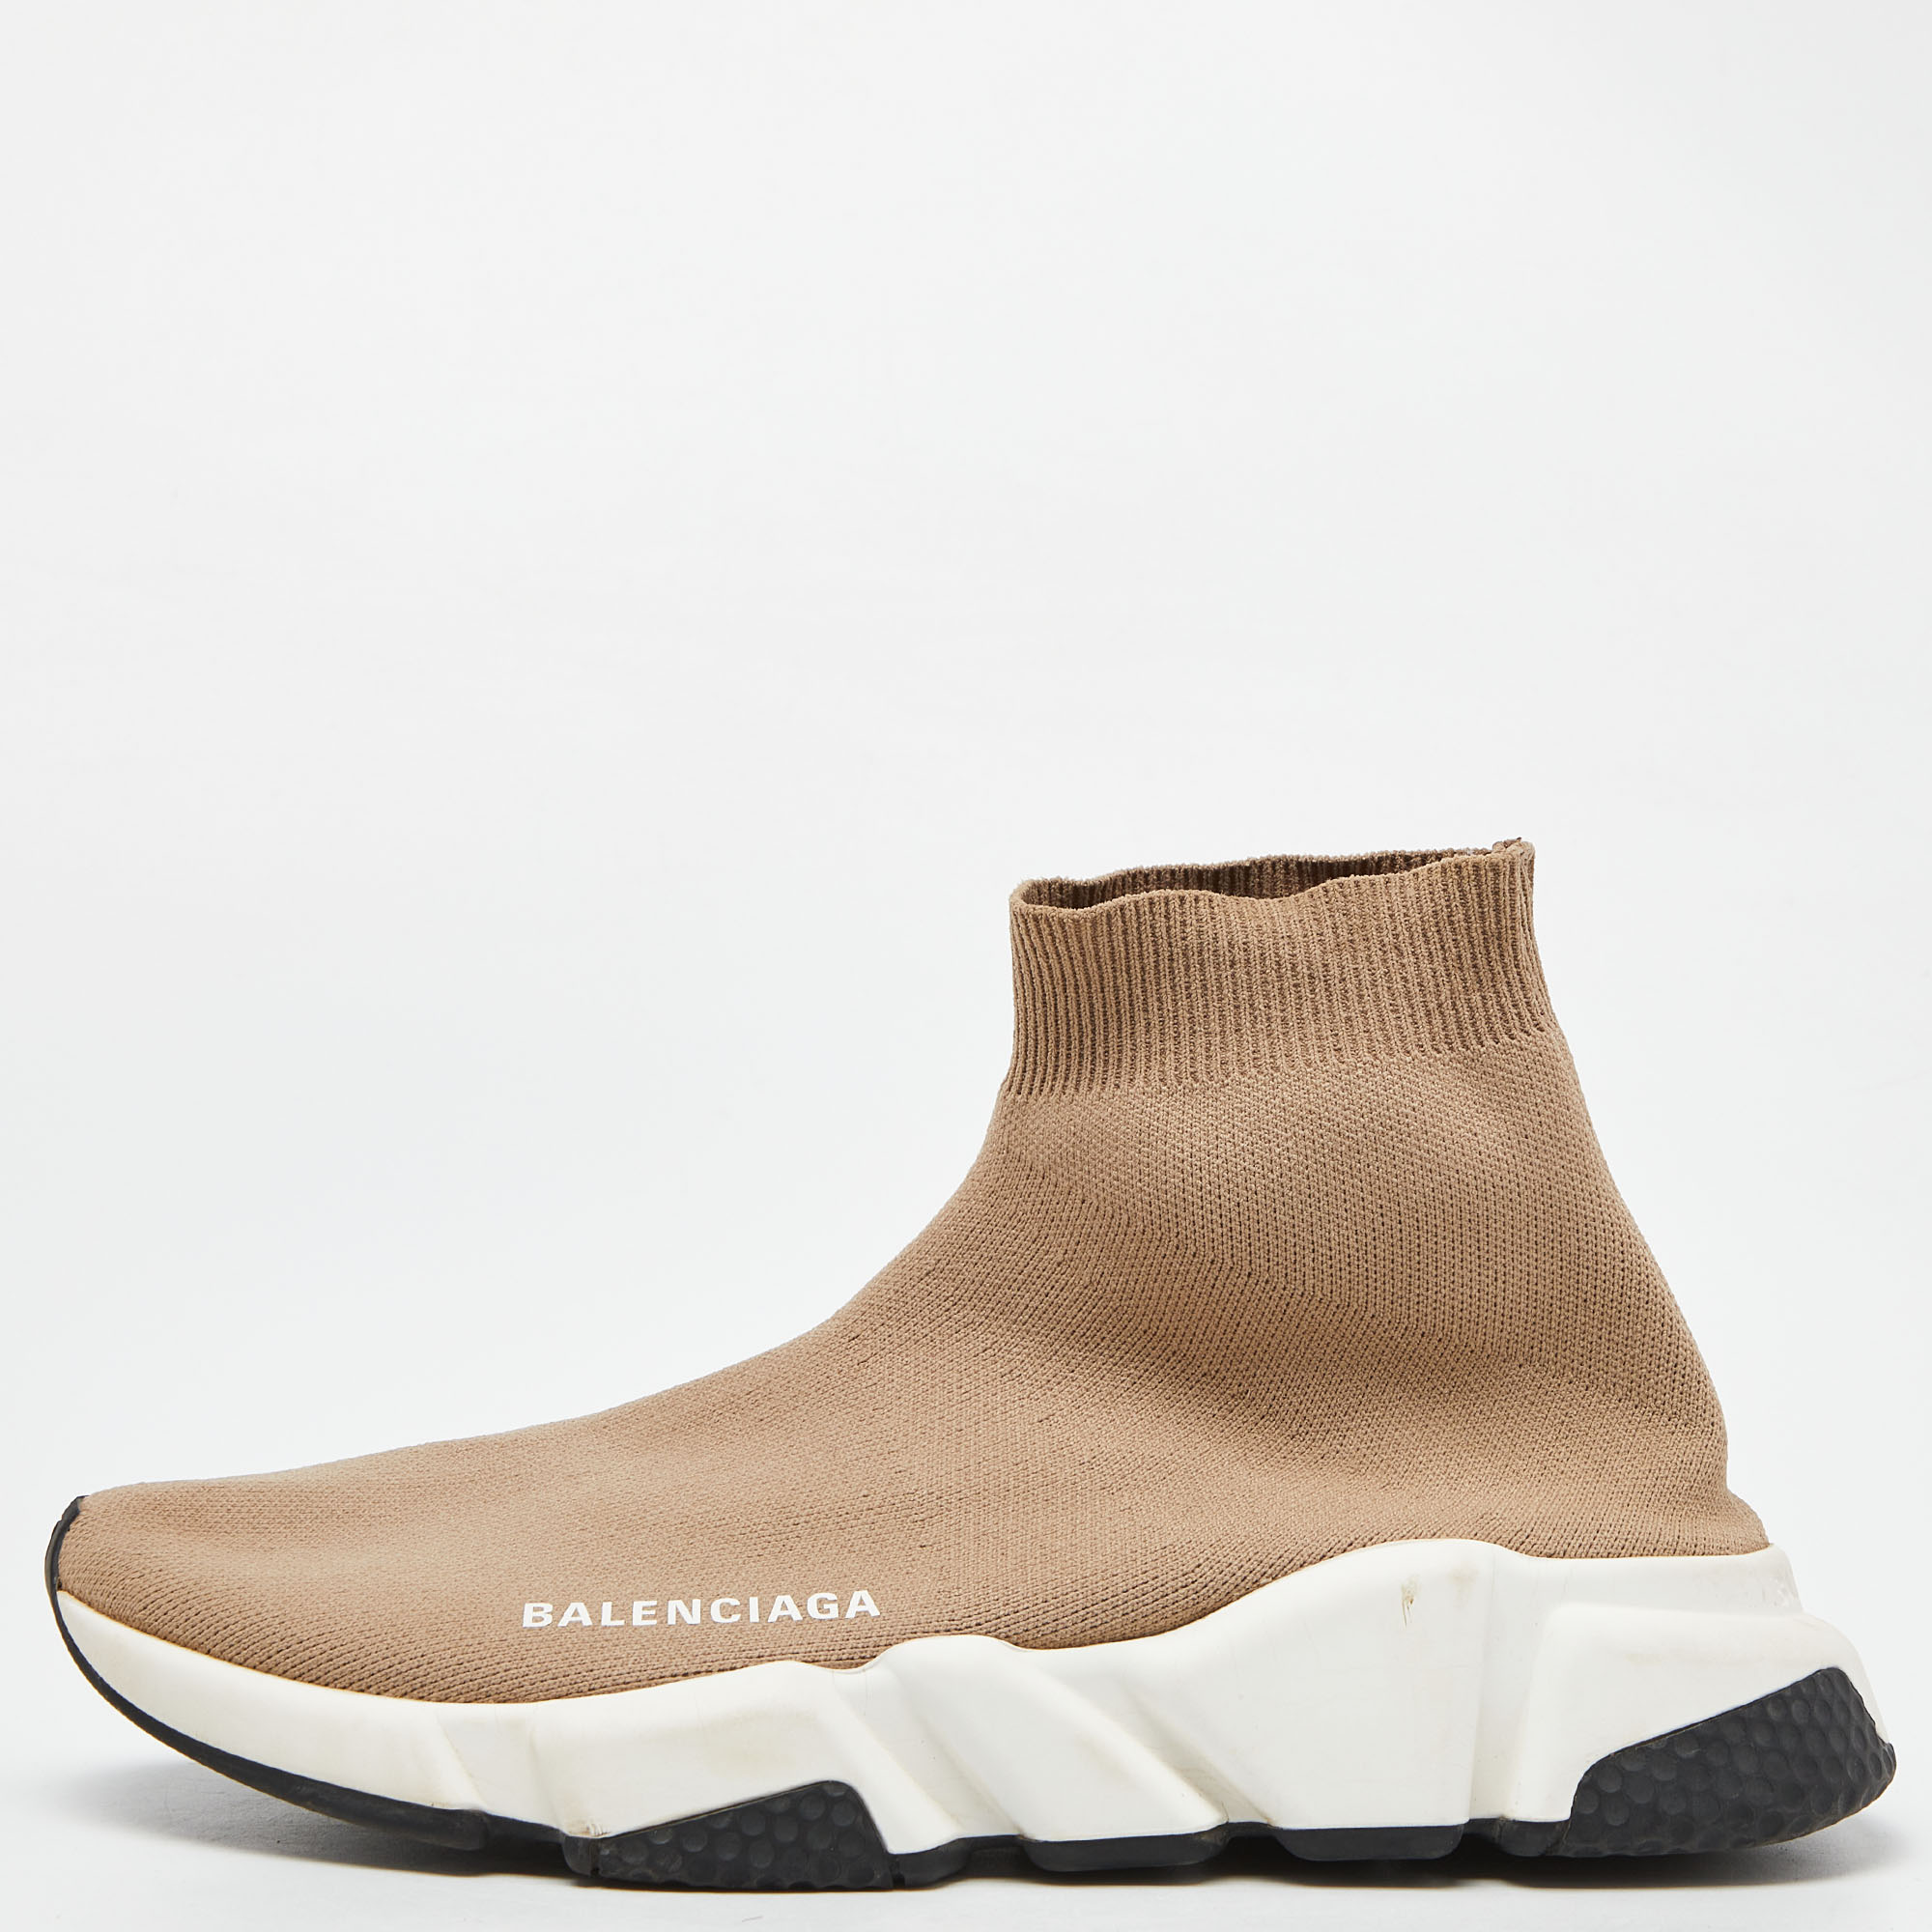 Balenciaga beige knit fabric speed trainer high-top sneakers size 38